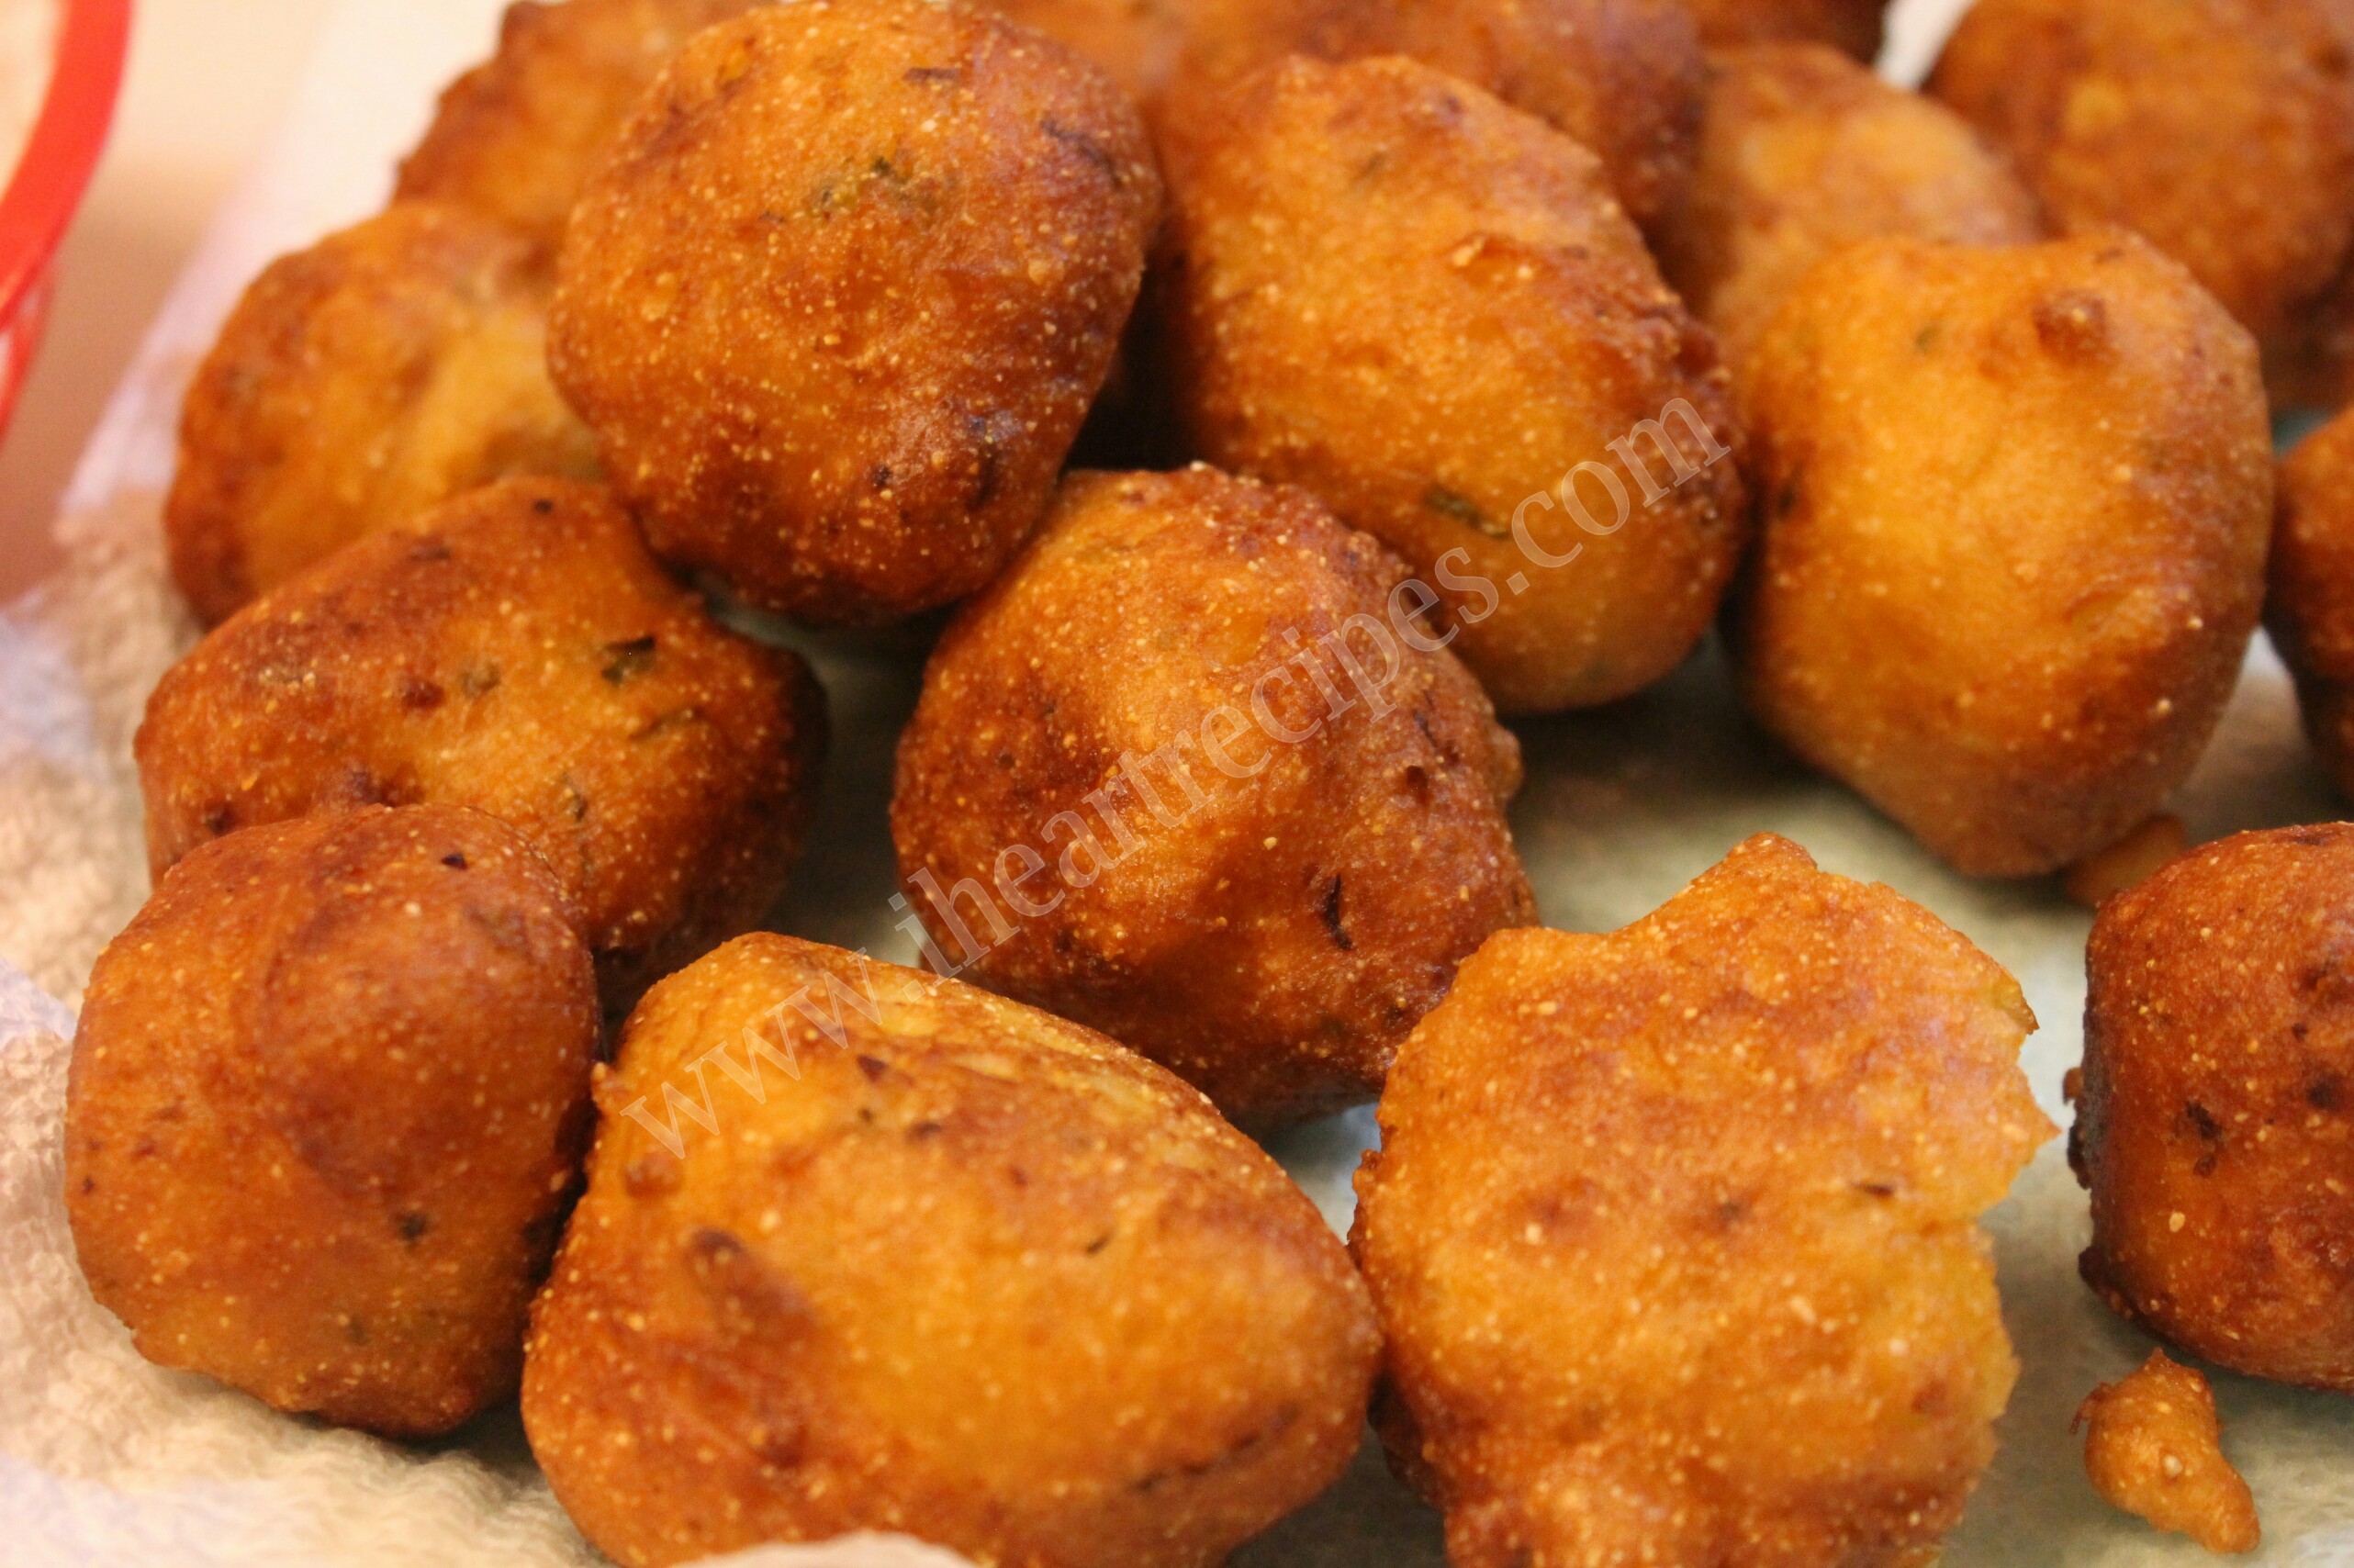 What are hush puppies? Think of them as little savory donut holes with spiced batter.